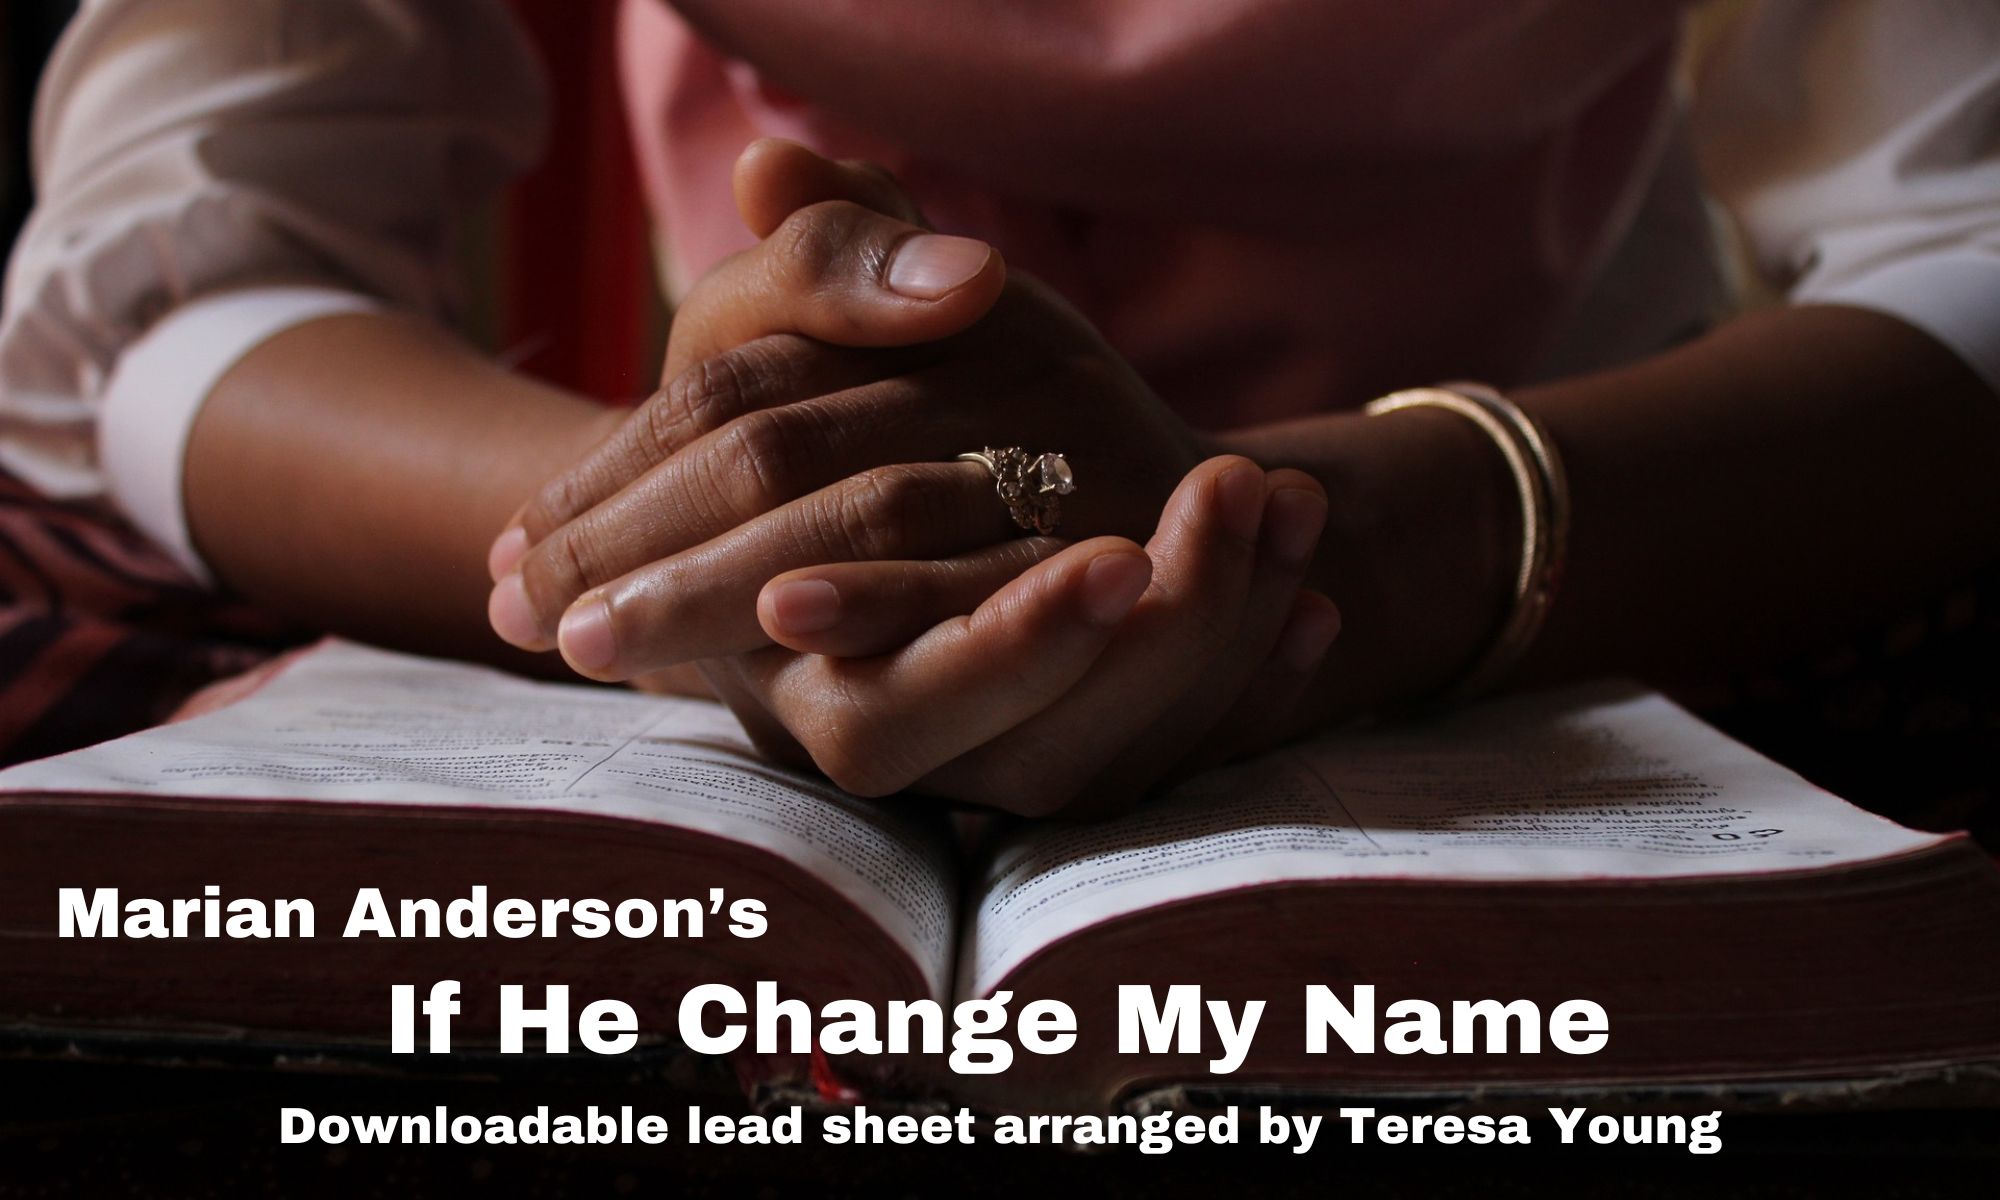 Marian Anderson's If He Change My Name, downloadable lead sheet